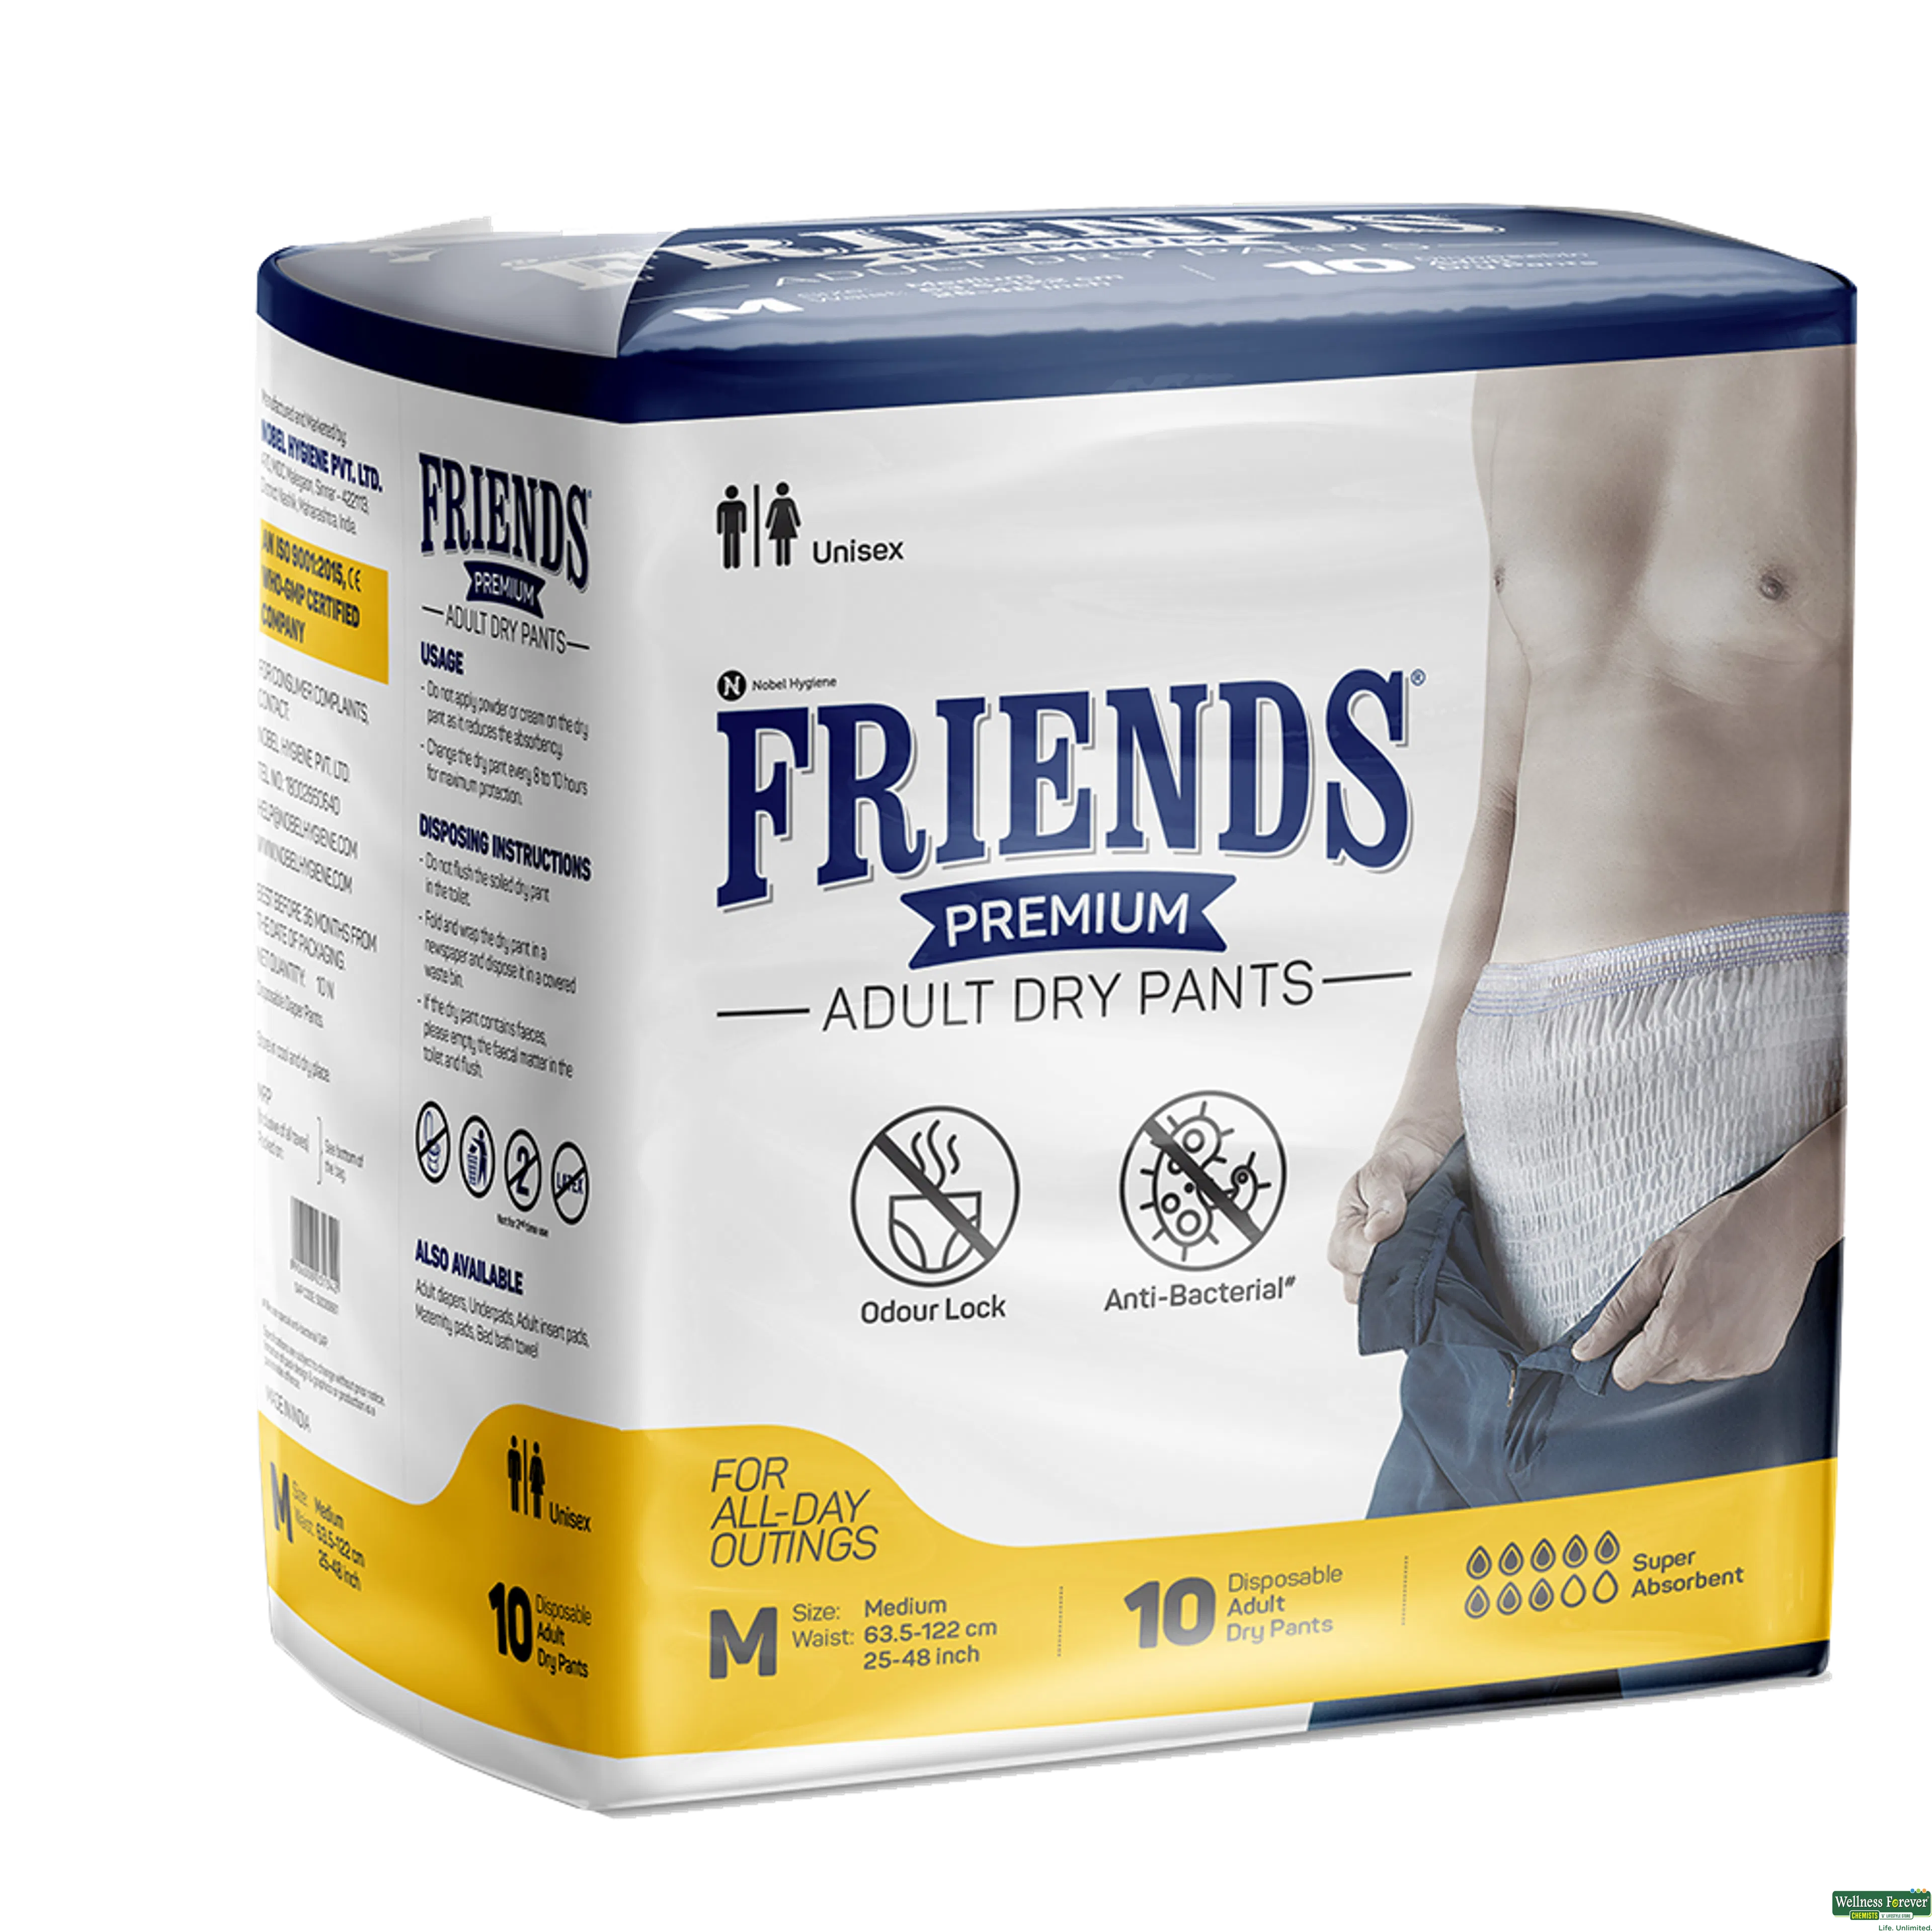 Lifree Absorbent Pants - Unisex Adult Diaper | Size Medium: Buy packet of  18.0 diapers at best price in India | 1mg